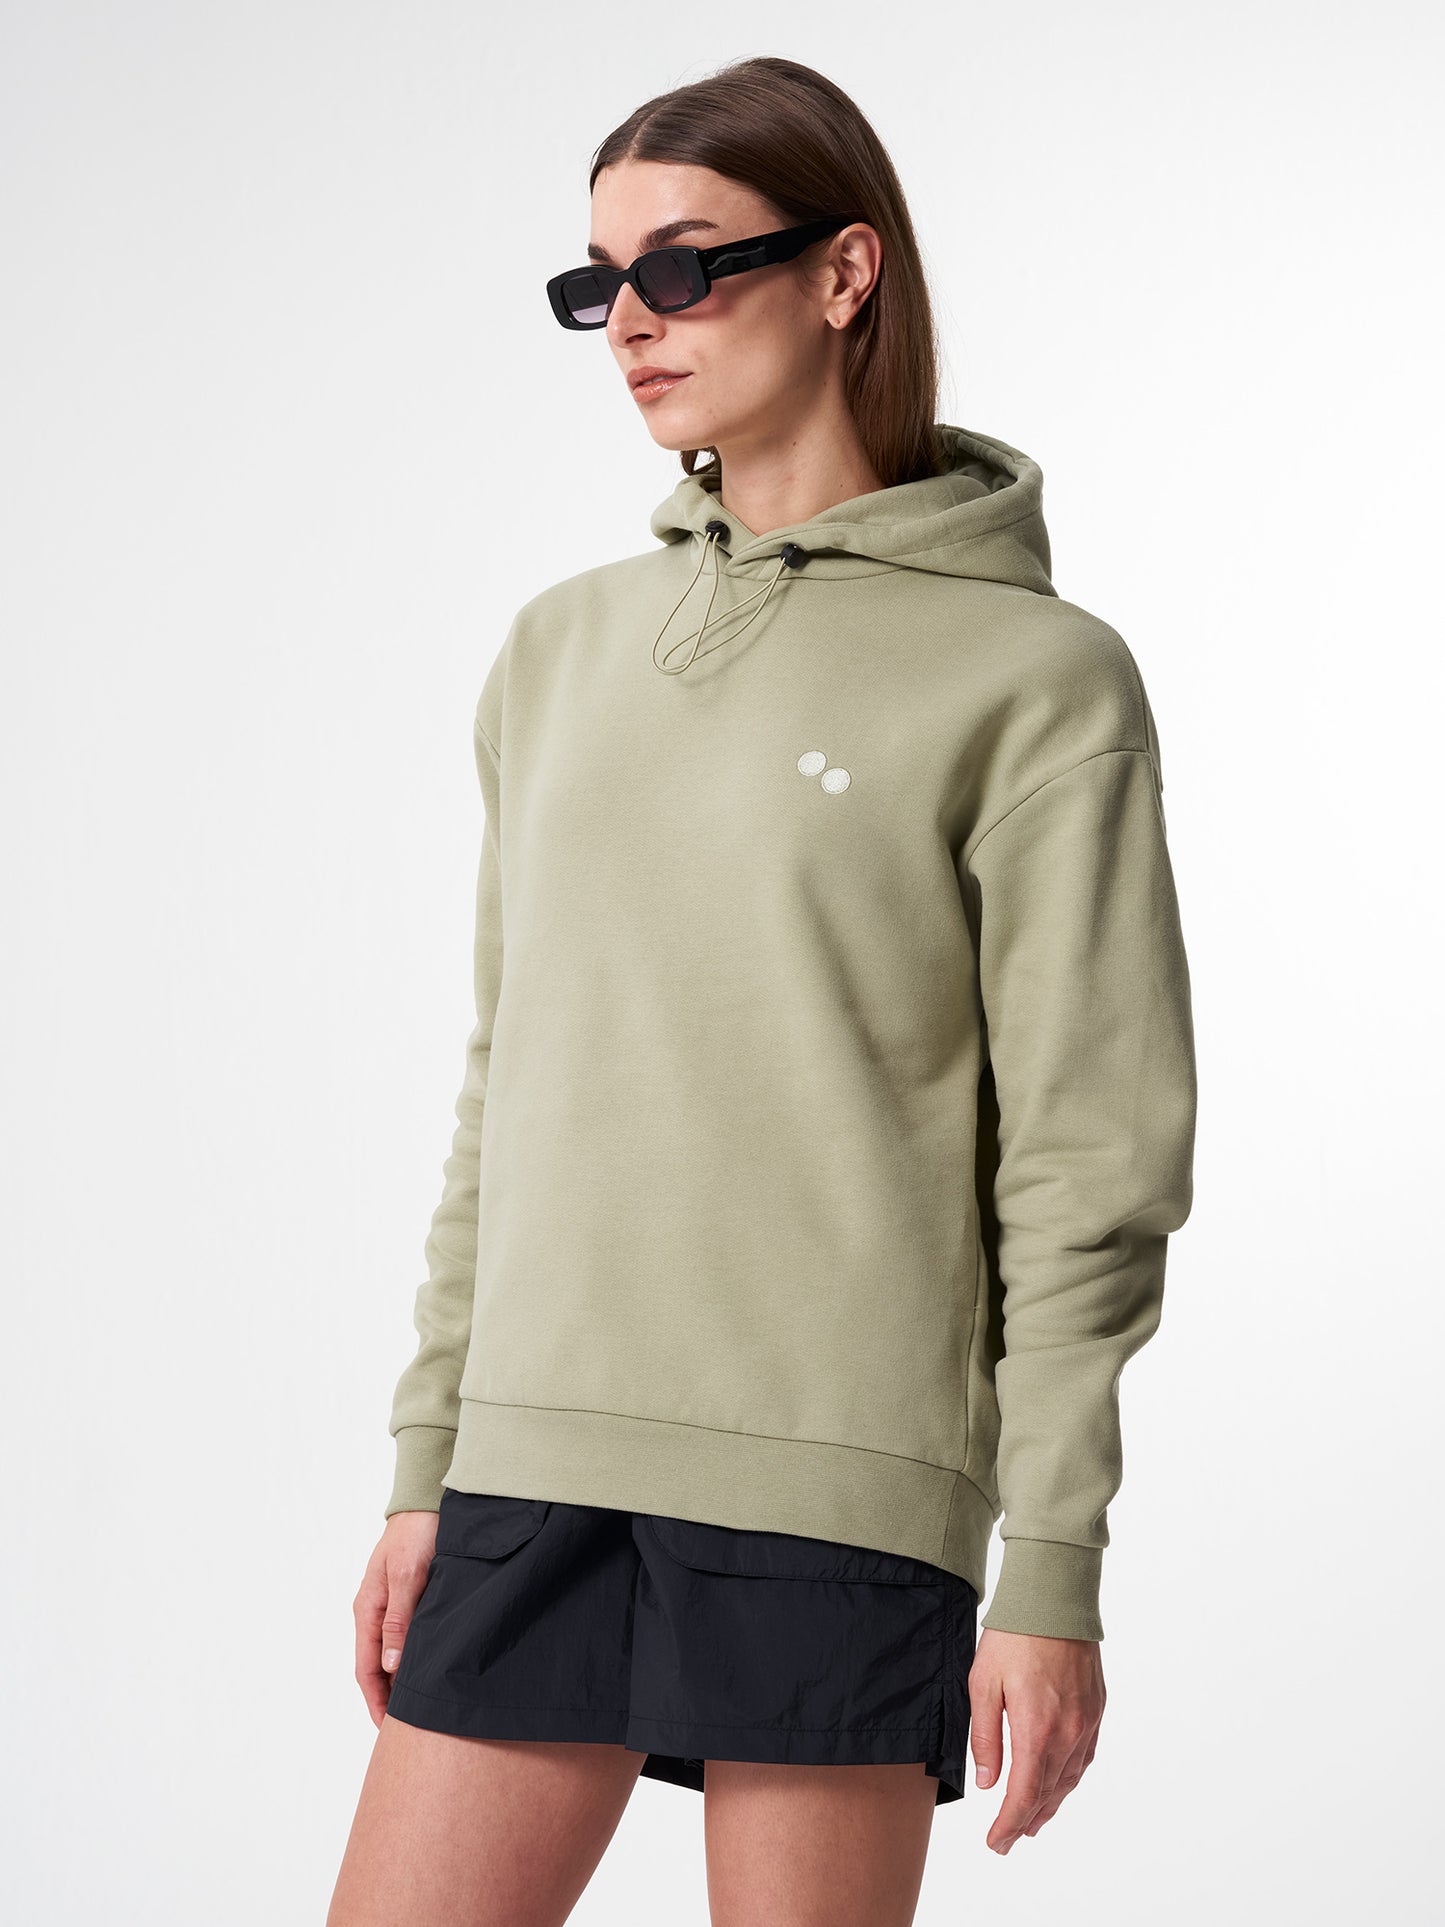 pinqponq-Hoodie-Unisex-Reed-Olive-model-front